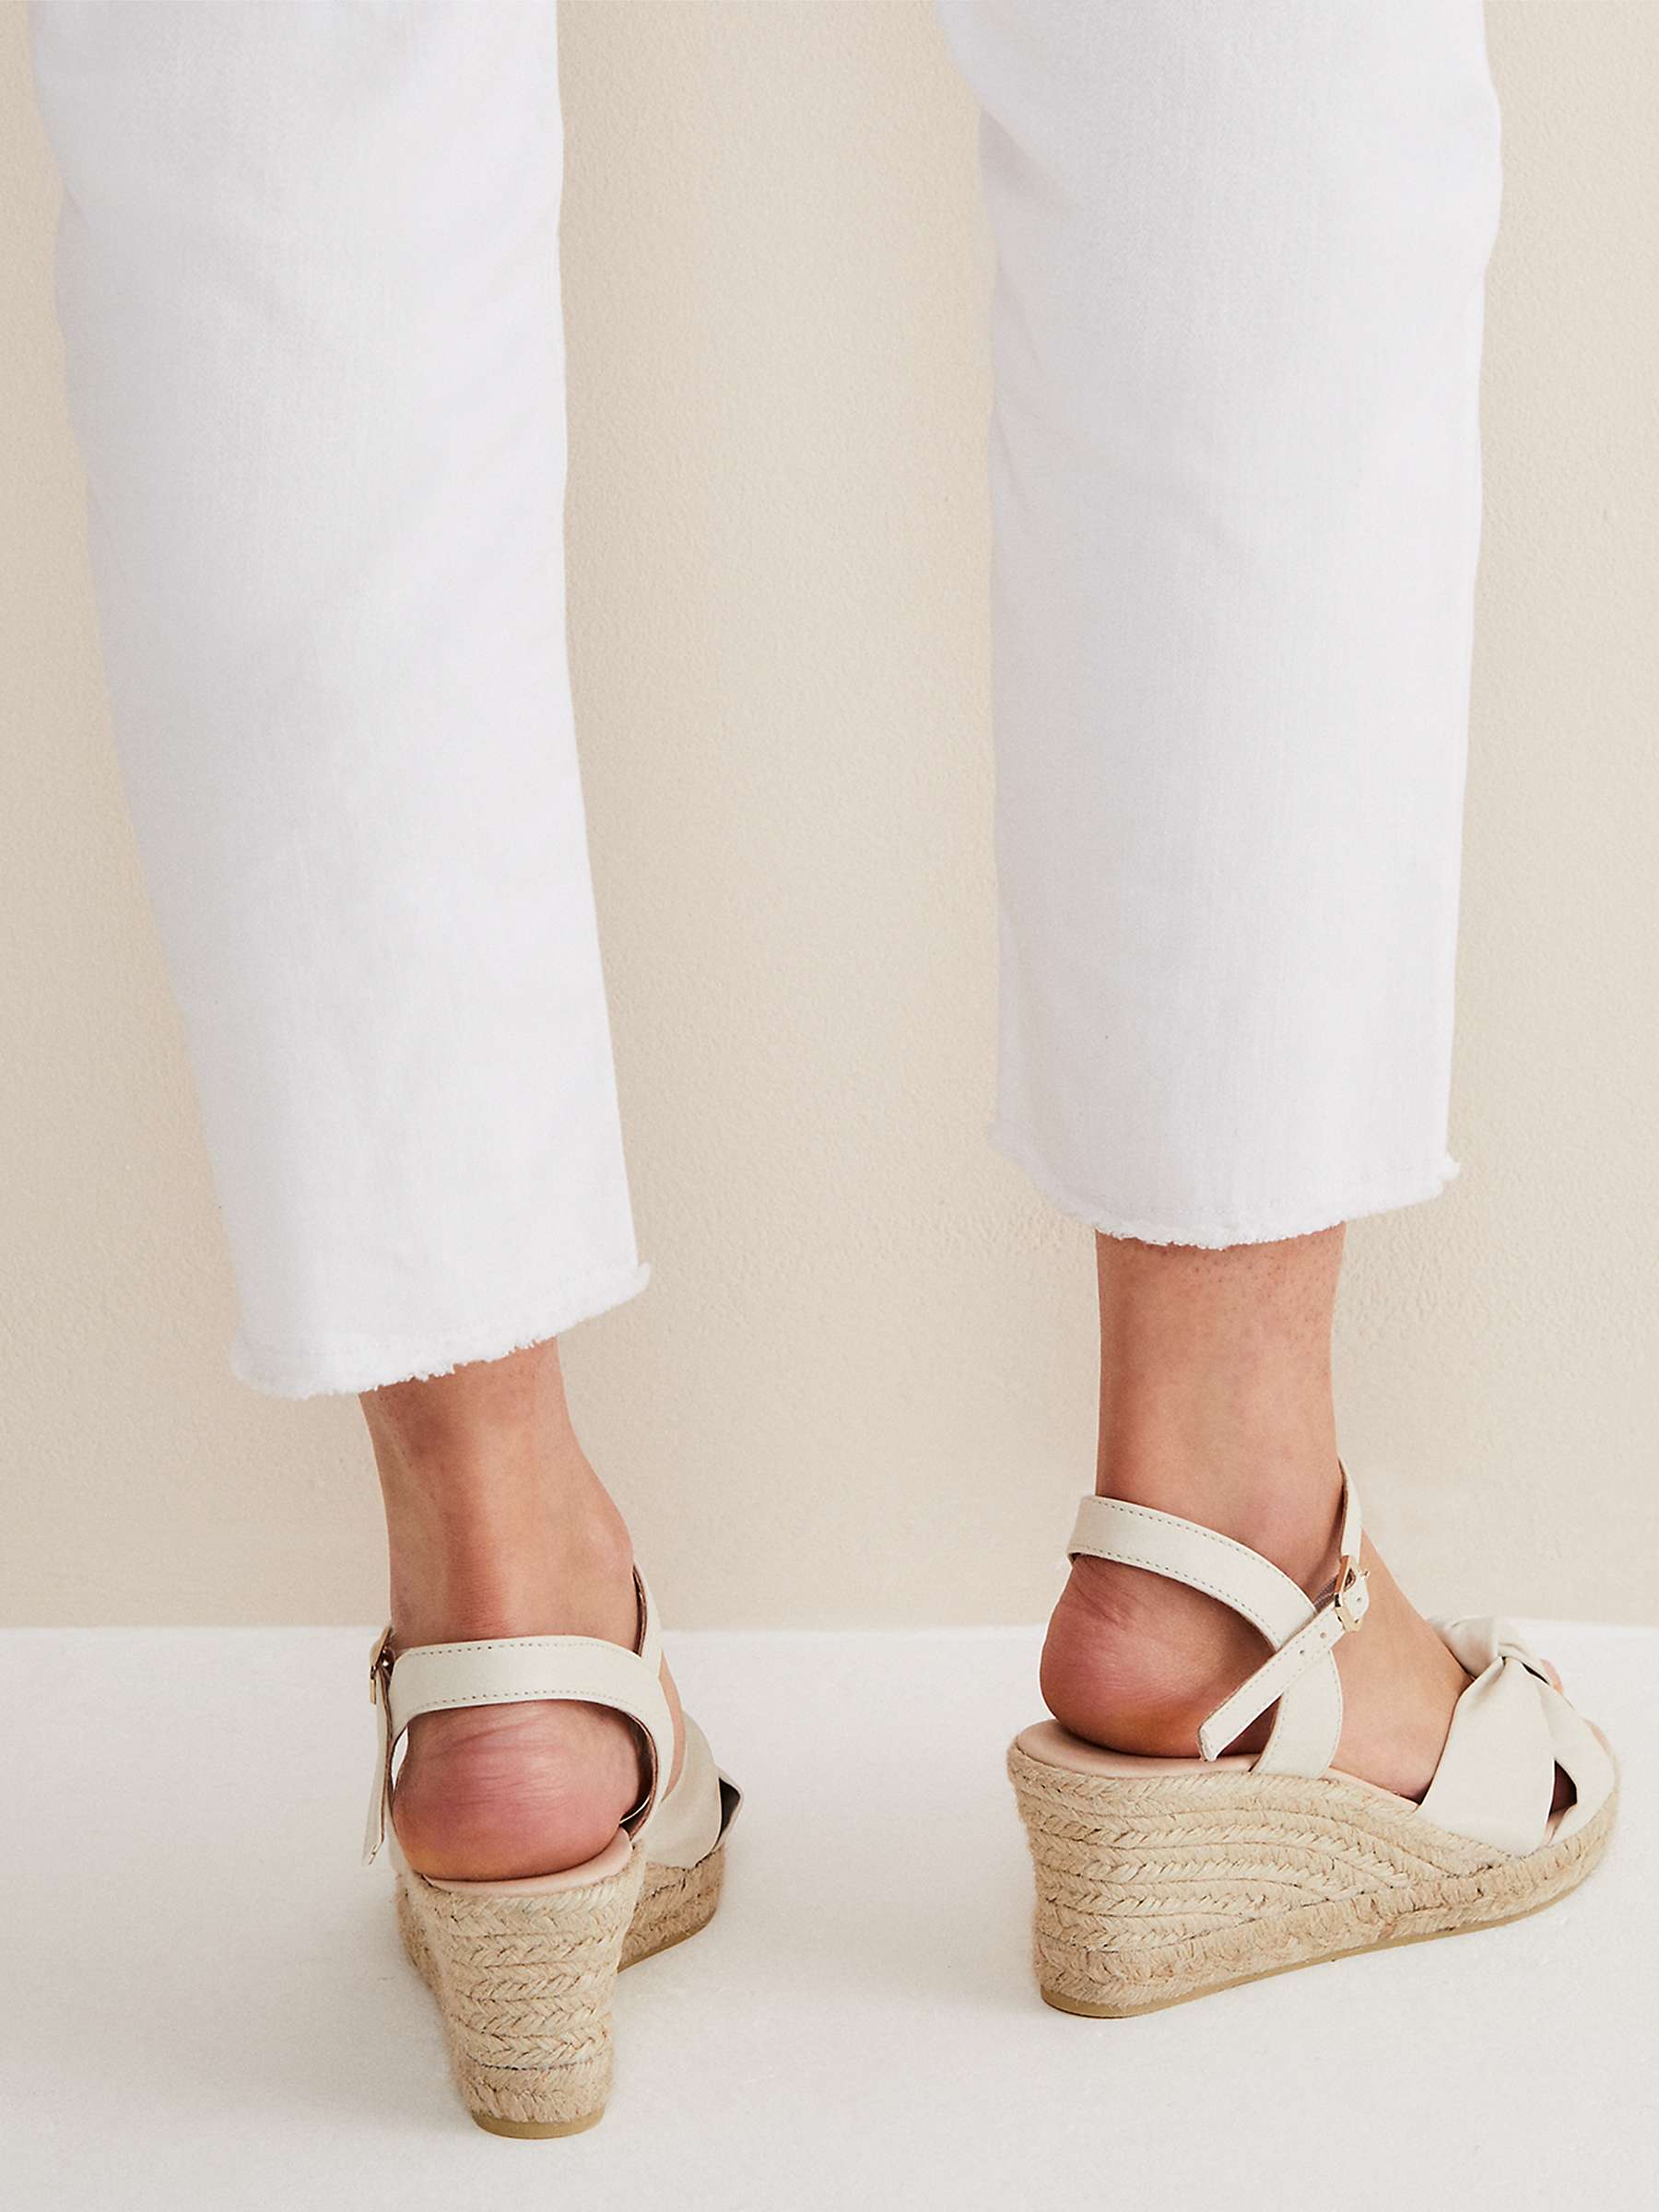 Buy Phase Eight Leather Knot Front Espadrille Shoes Online at johnlewis.com